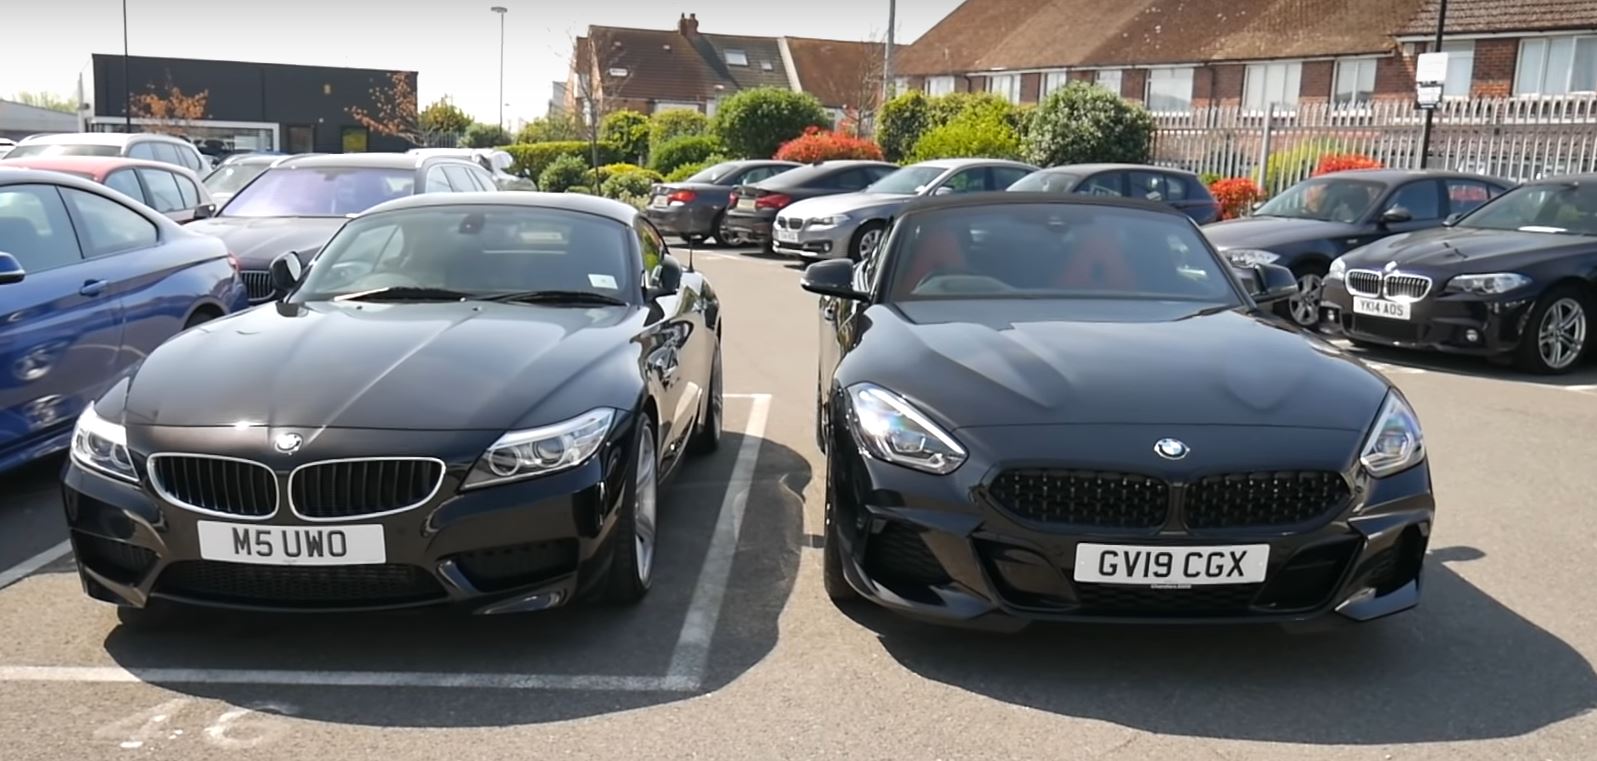 Name:  new-g29-bmw-z4-compared-to-old-e89-z4-by-owner-generation-gap-is-real-135940_1.jpg
Views: 3416
Size:  170.9 KB